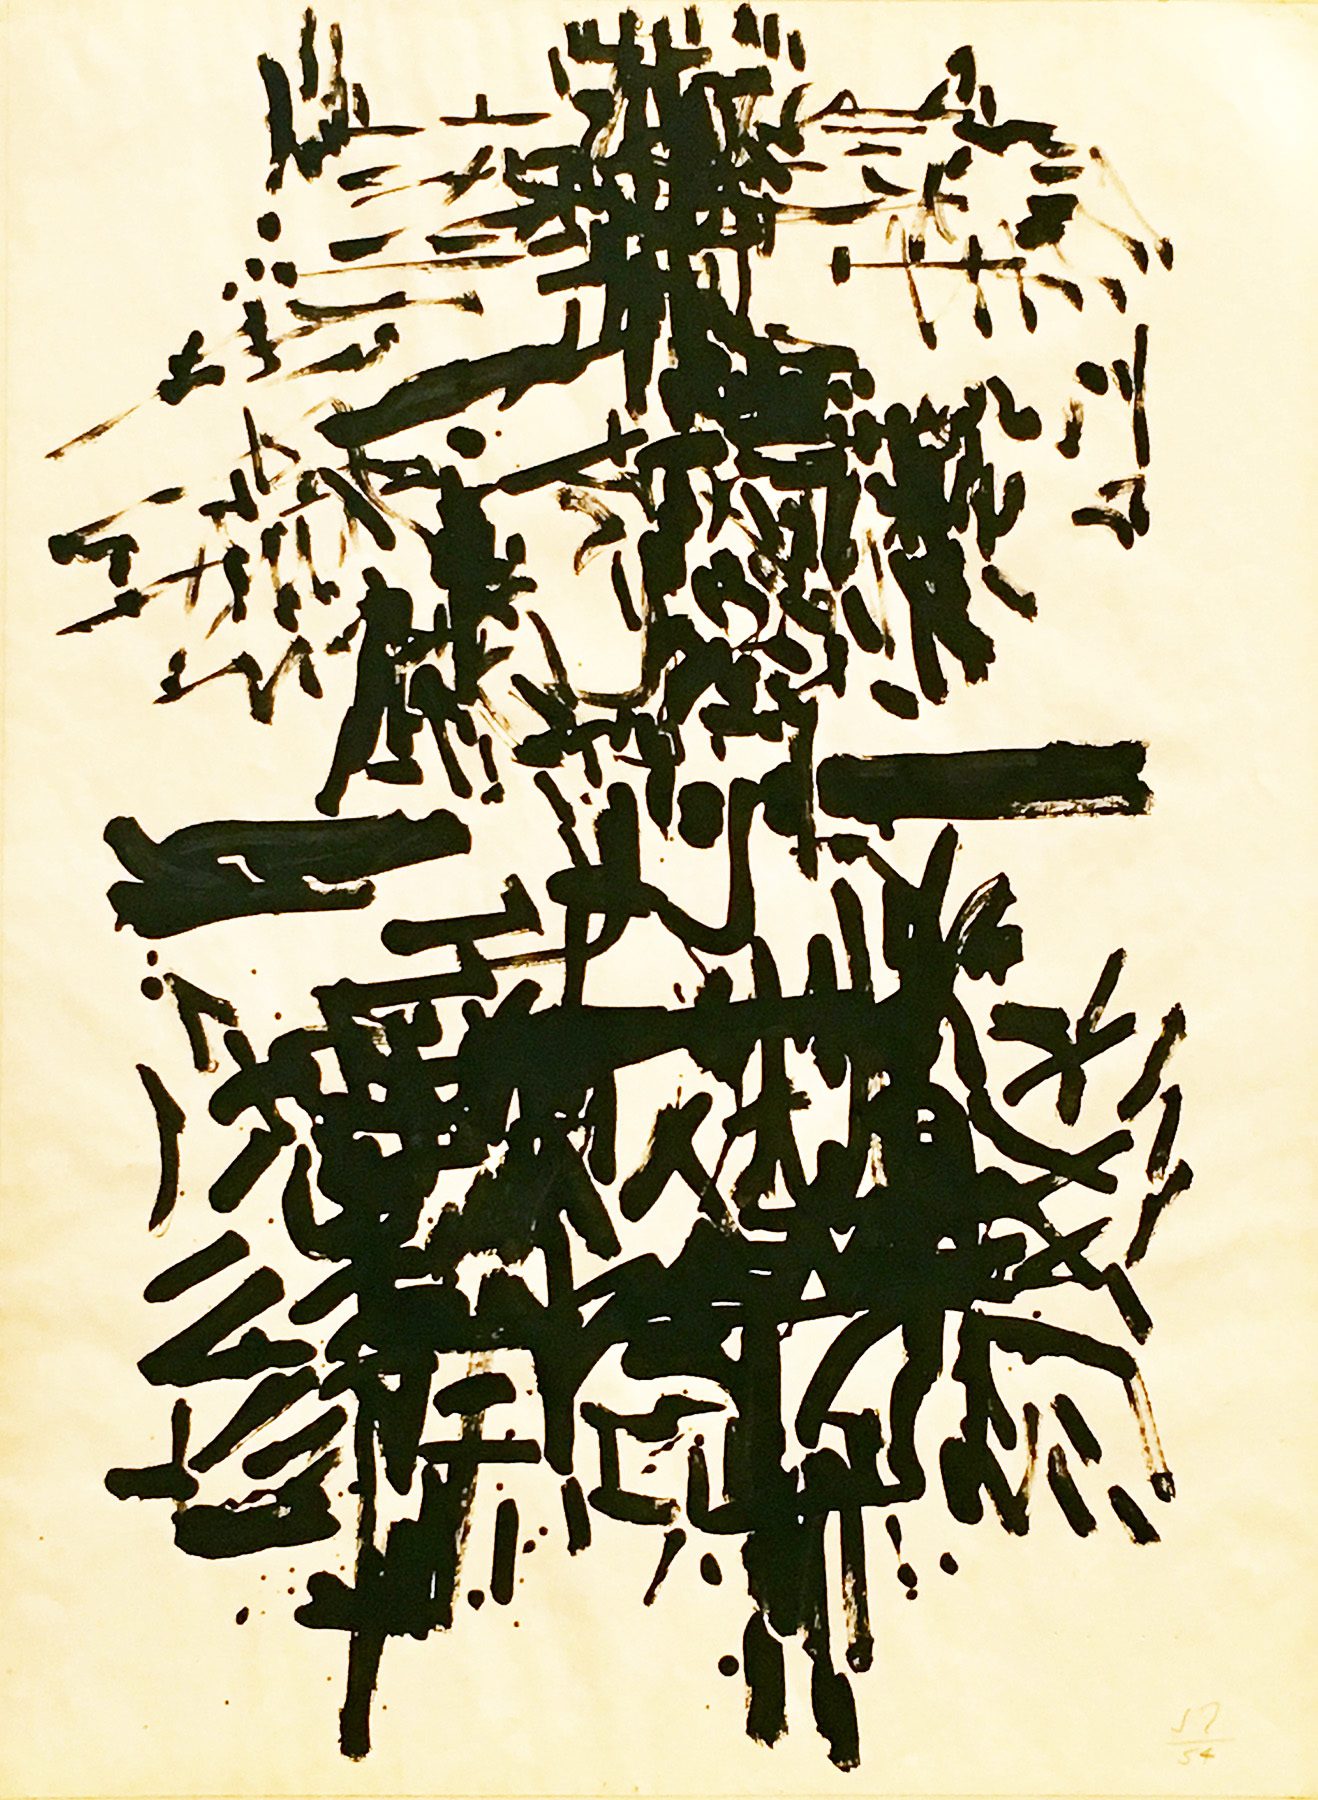 Abstract drawing of black brushstrokes on paper